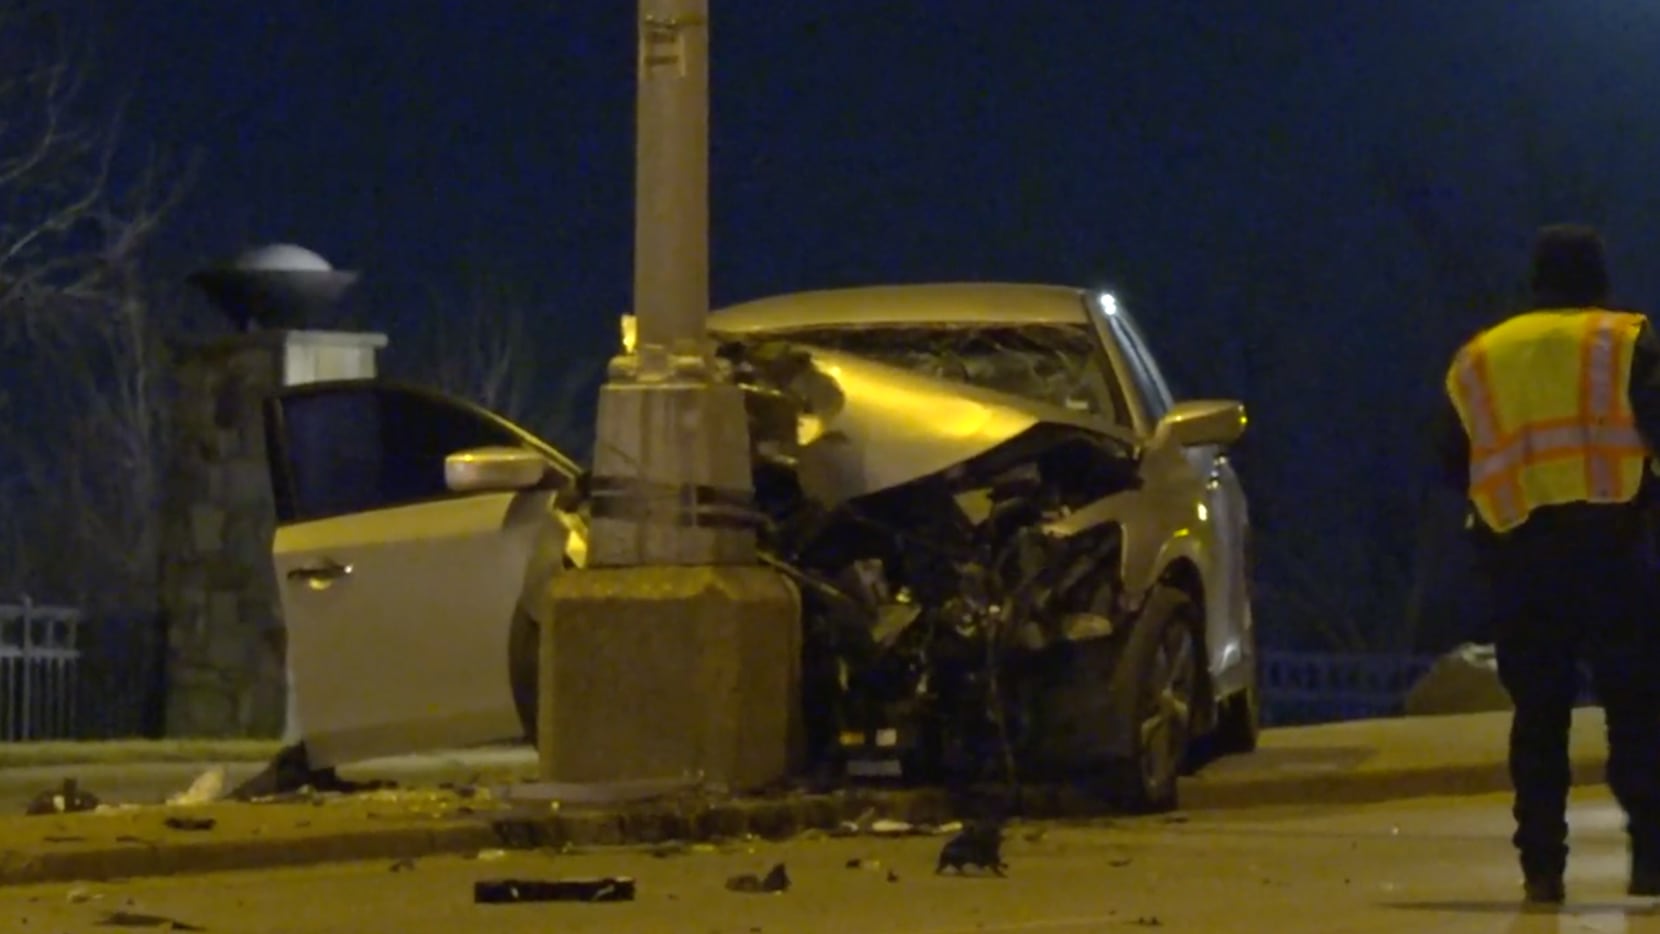 Dallas police said the juvenile driver of the car was speeding when he lost control, left...